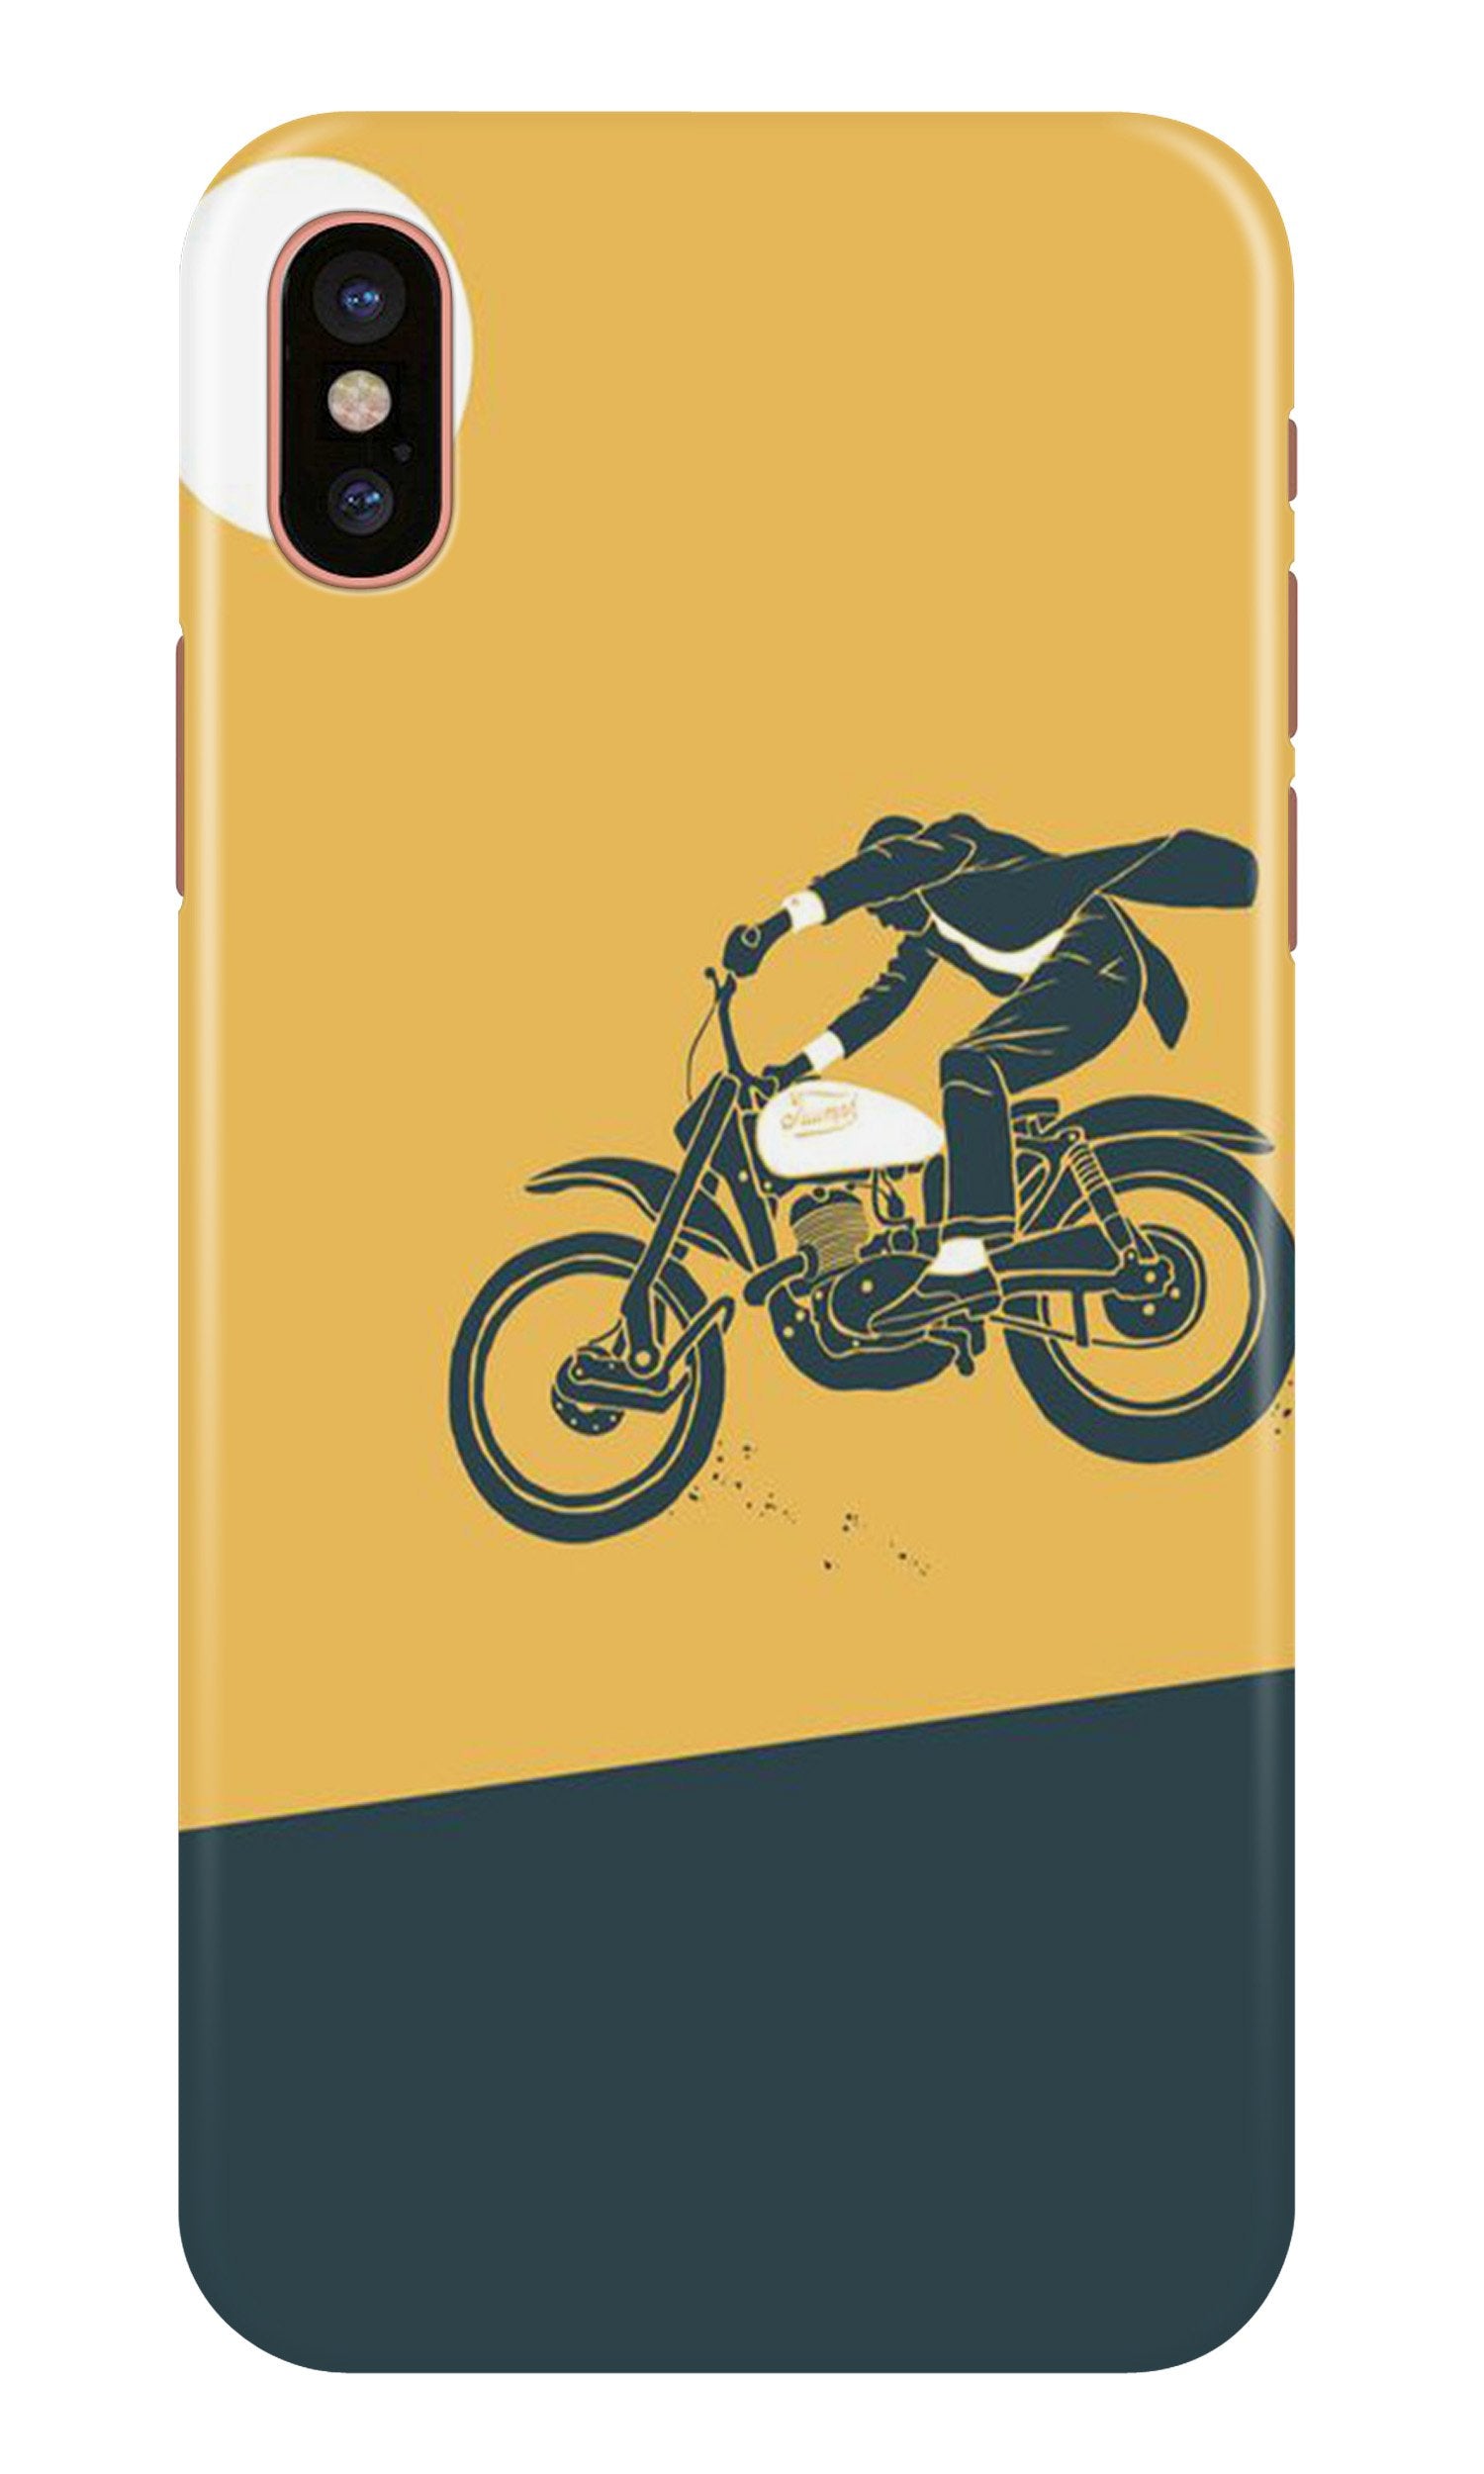 Bike Lovers Case for iPhone Xr (Design No. 256)